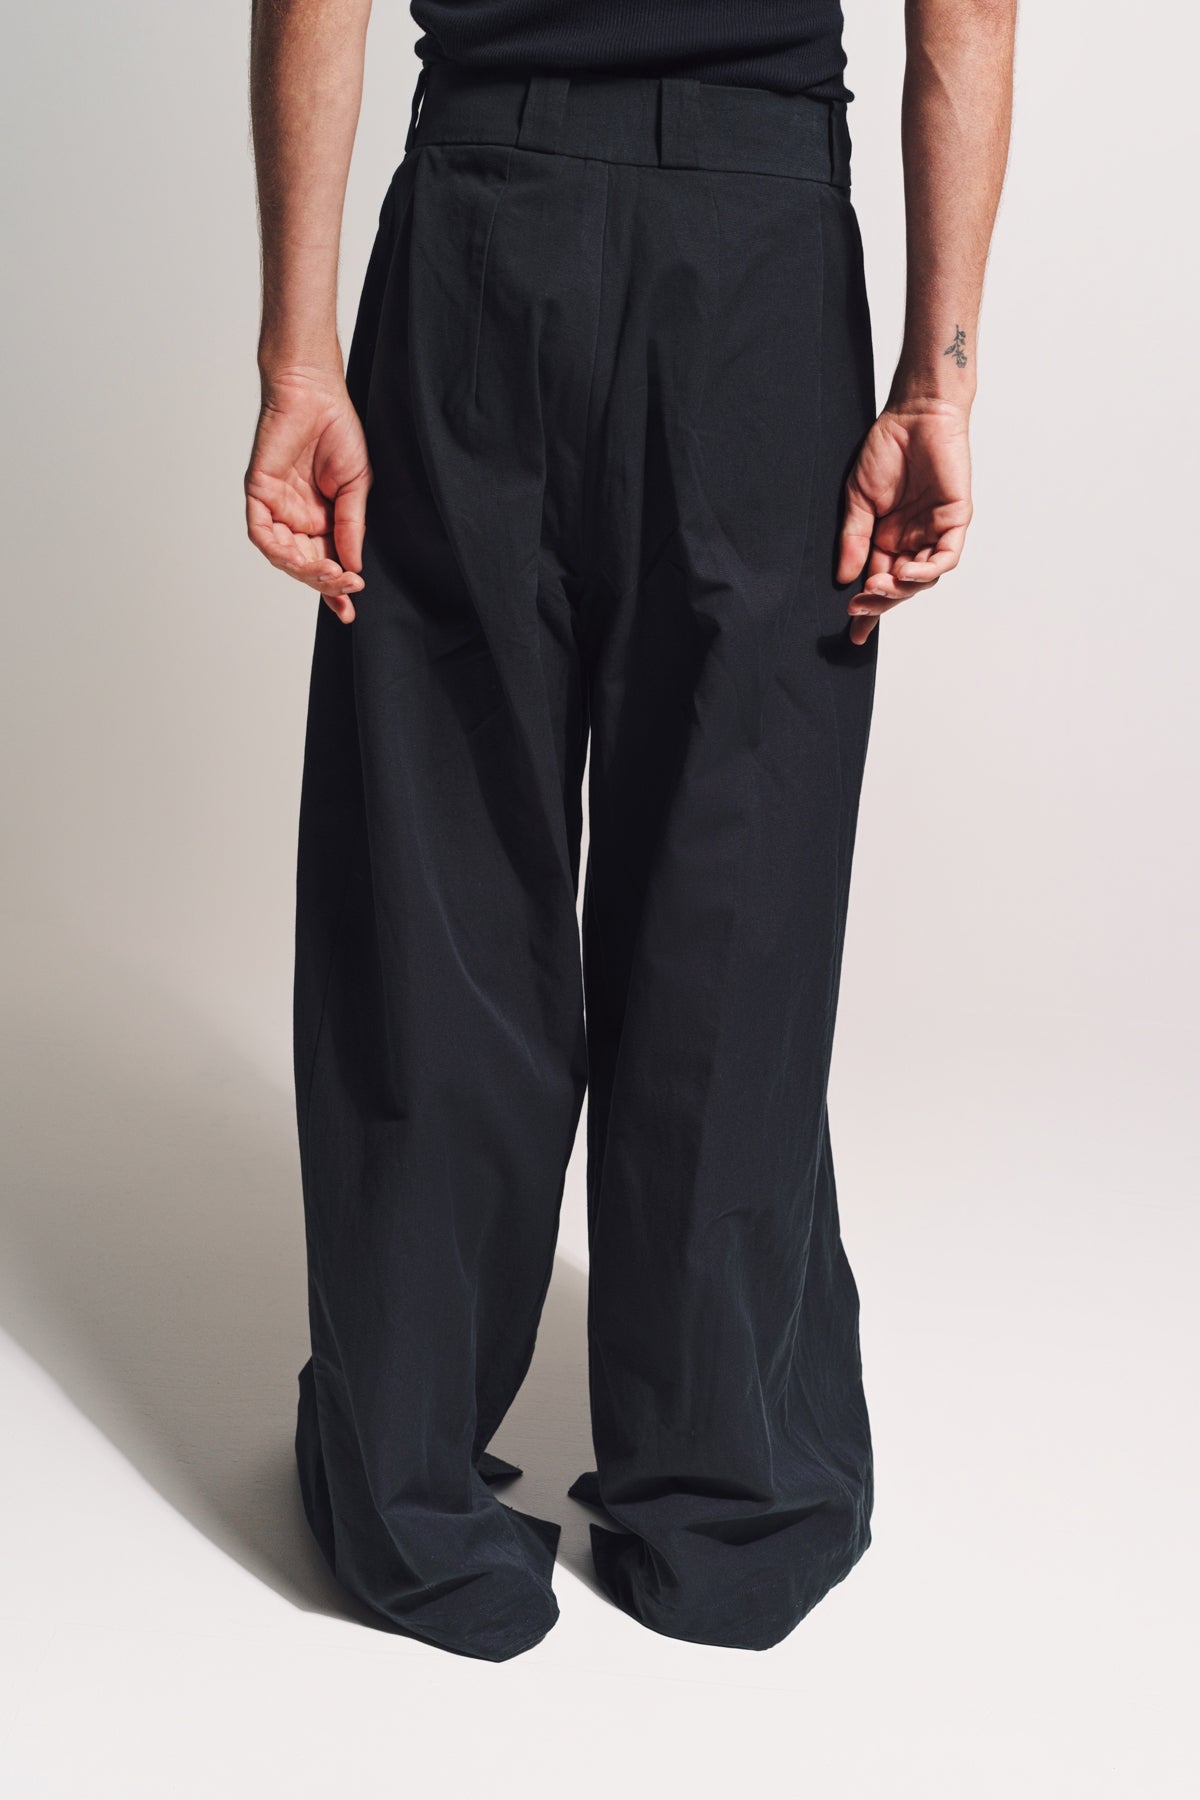 WILLY CHAVARRIA | MUDFLAPS TROUSERS